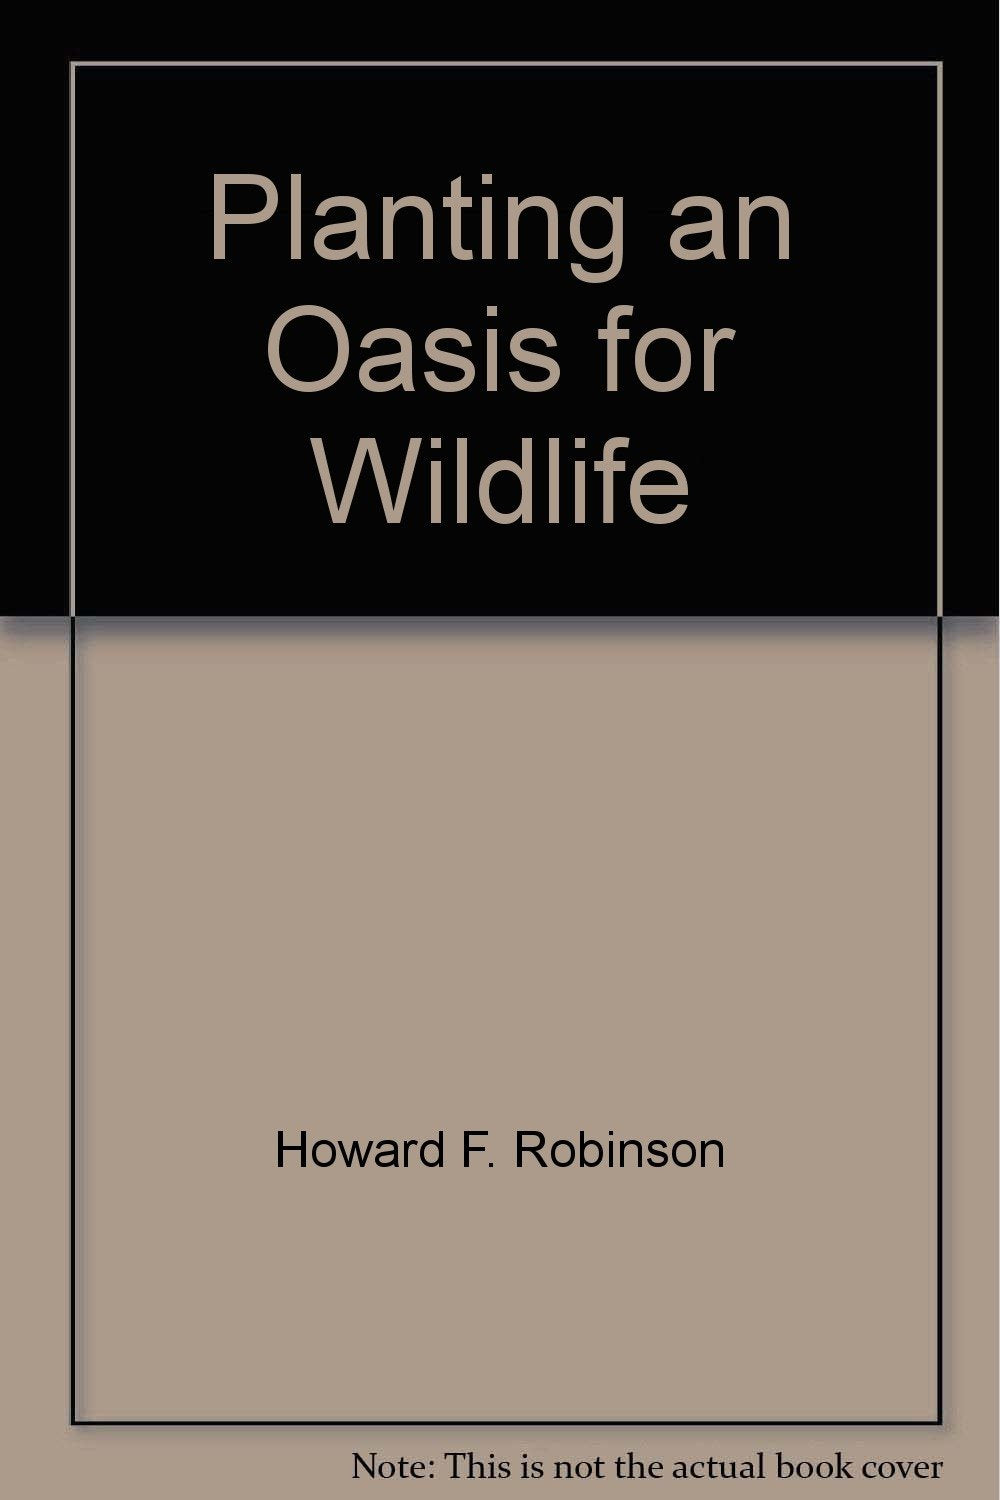 Planting an Oasis for Wildlife